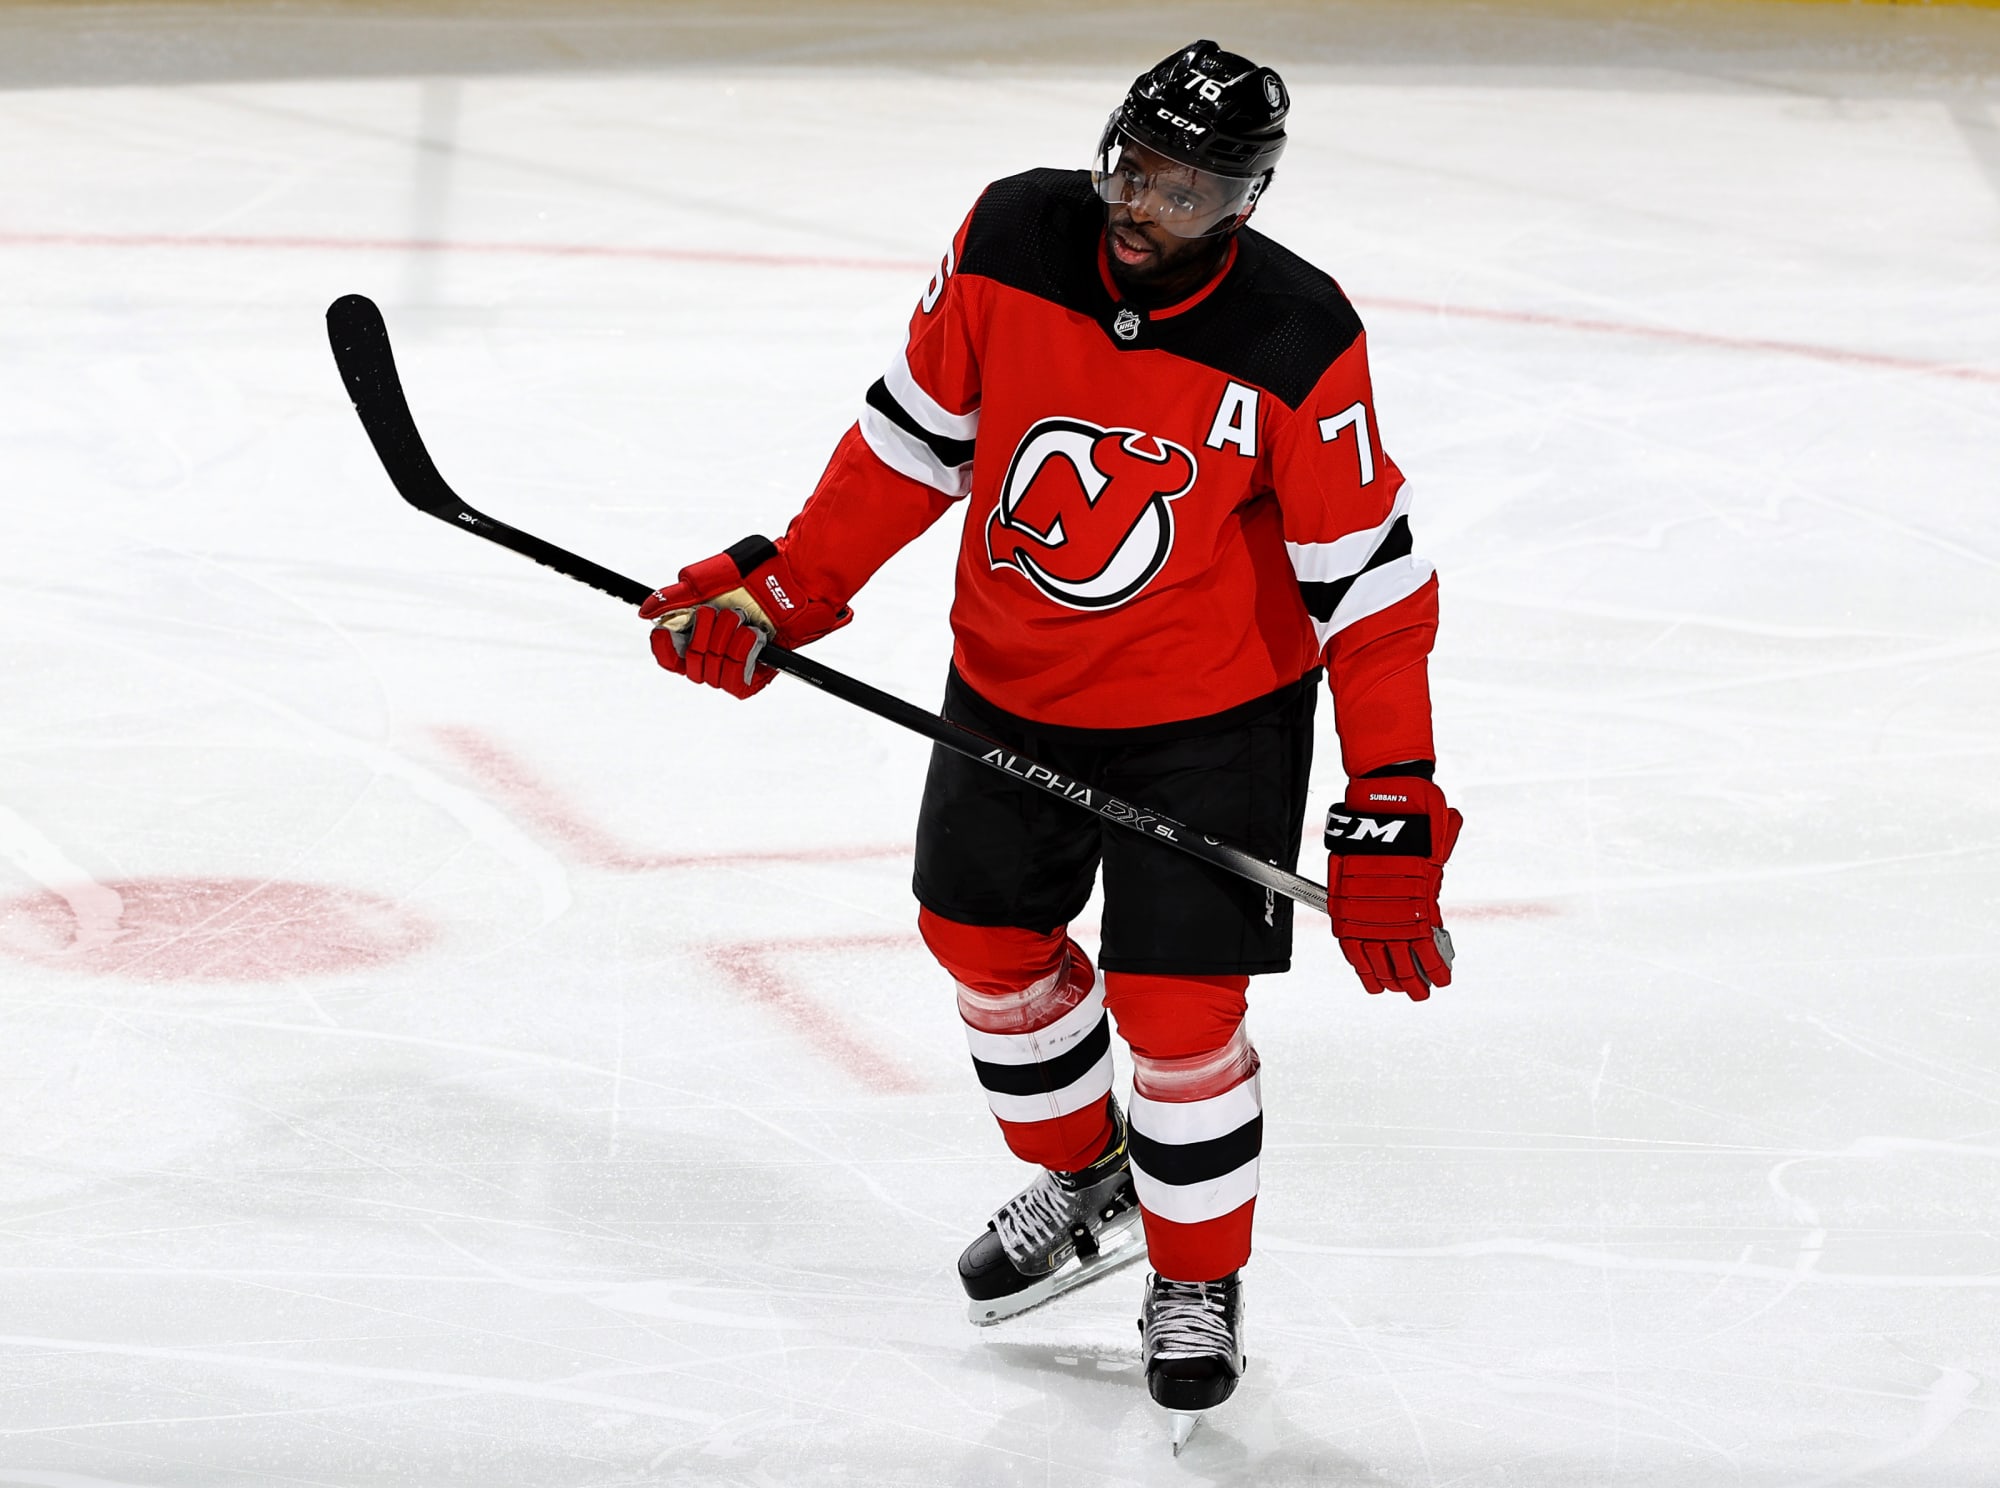 Looking Back At P.K. Subban's Time With New Jersey Devils